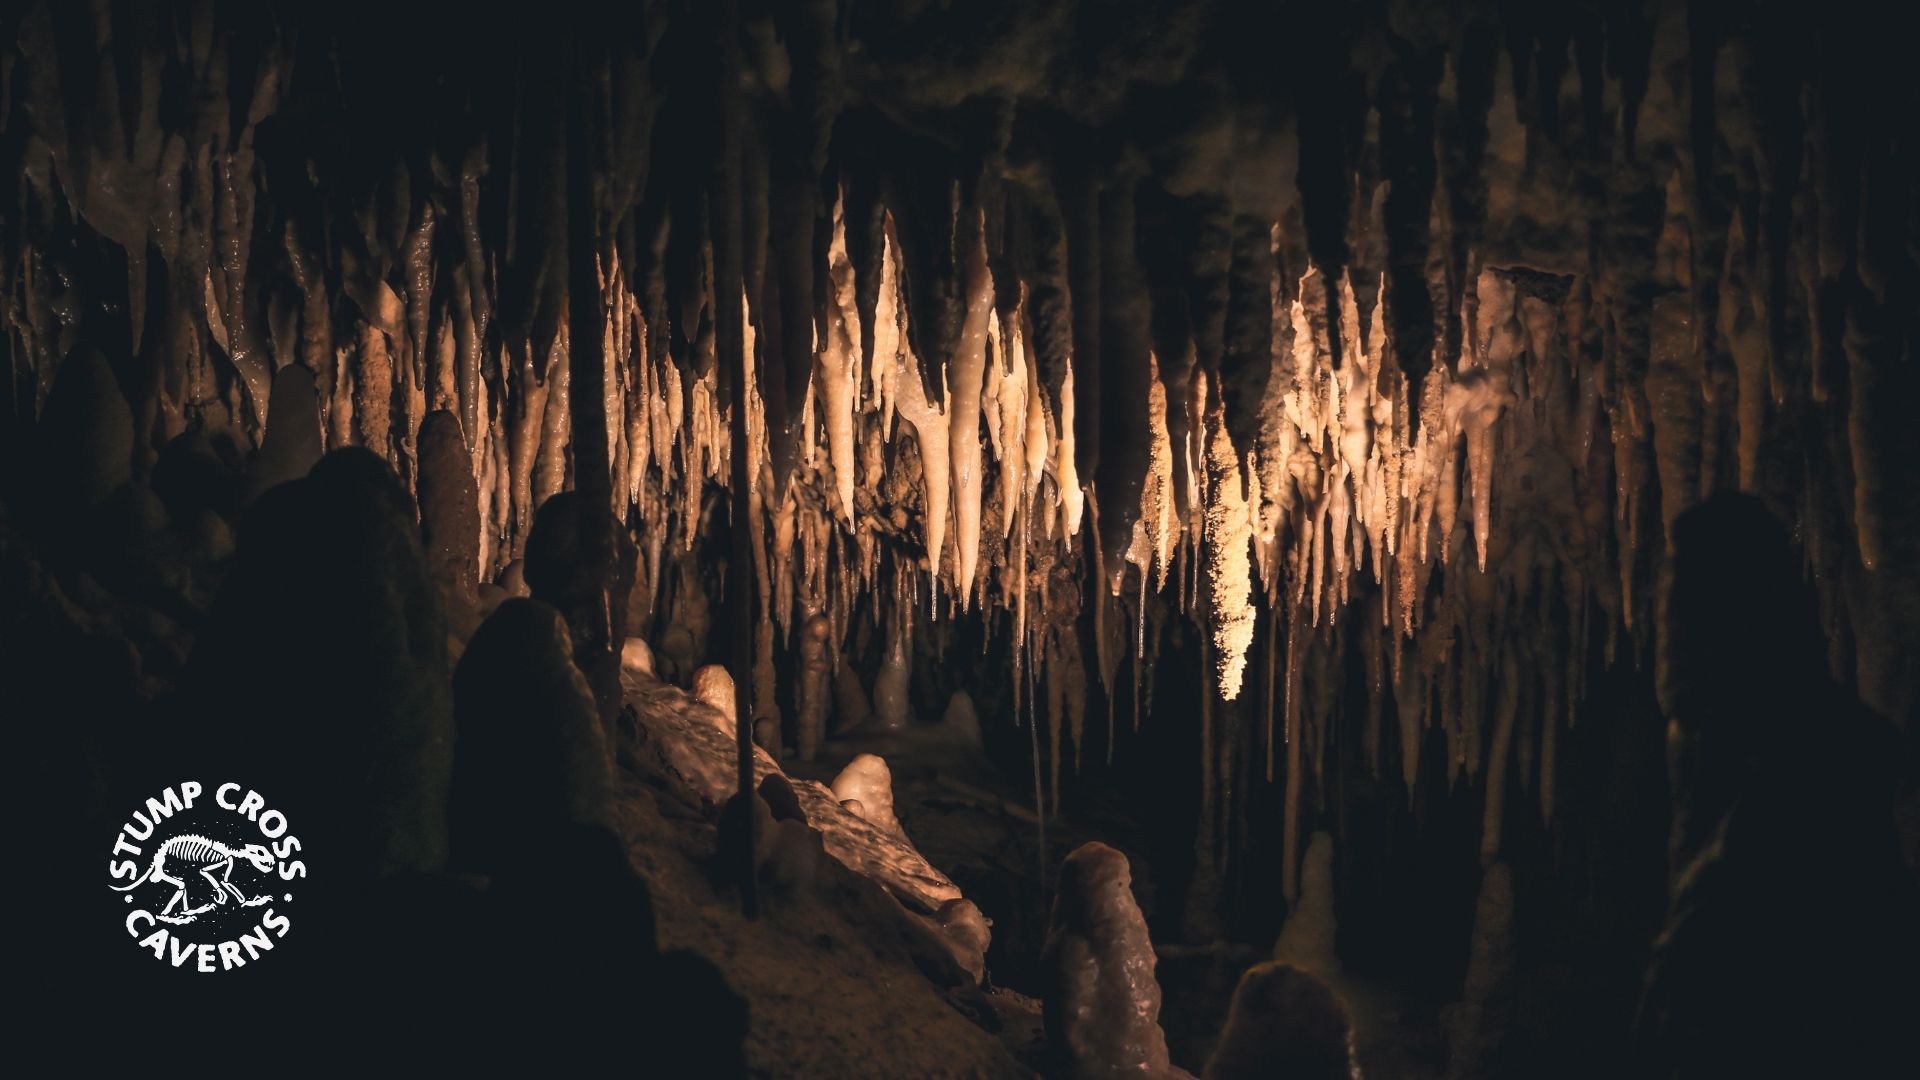 Caves are magnificent, delicate things. Learn how cavers and conservation groups keep them safe.
